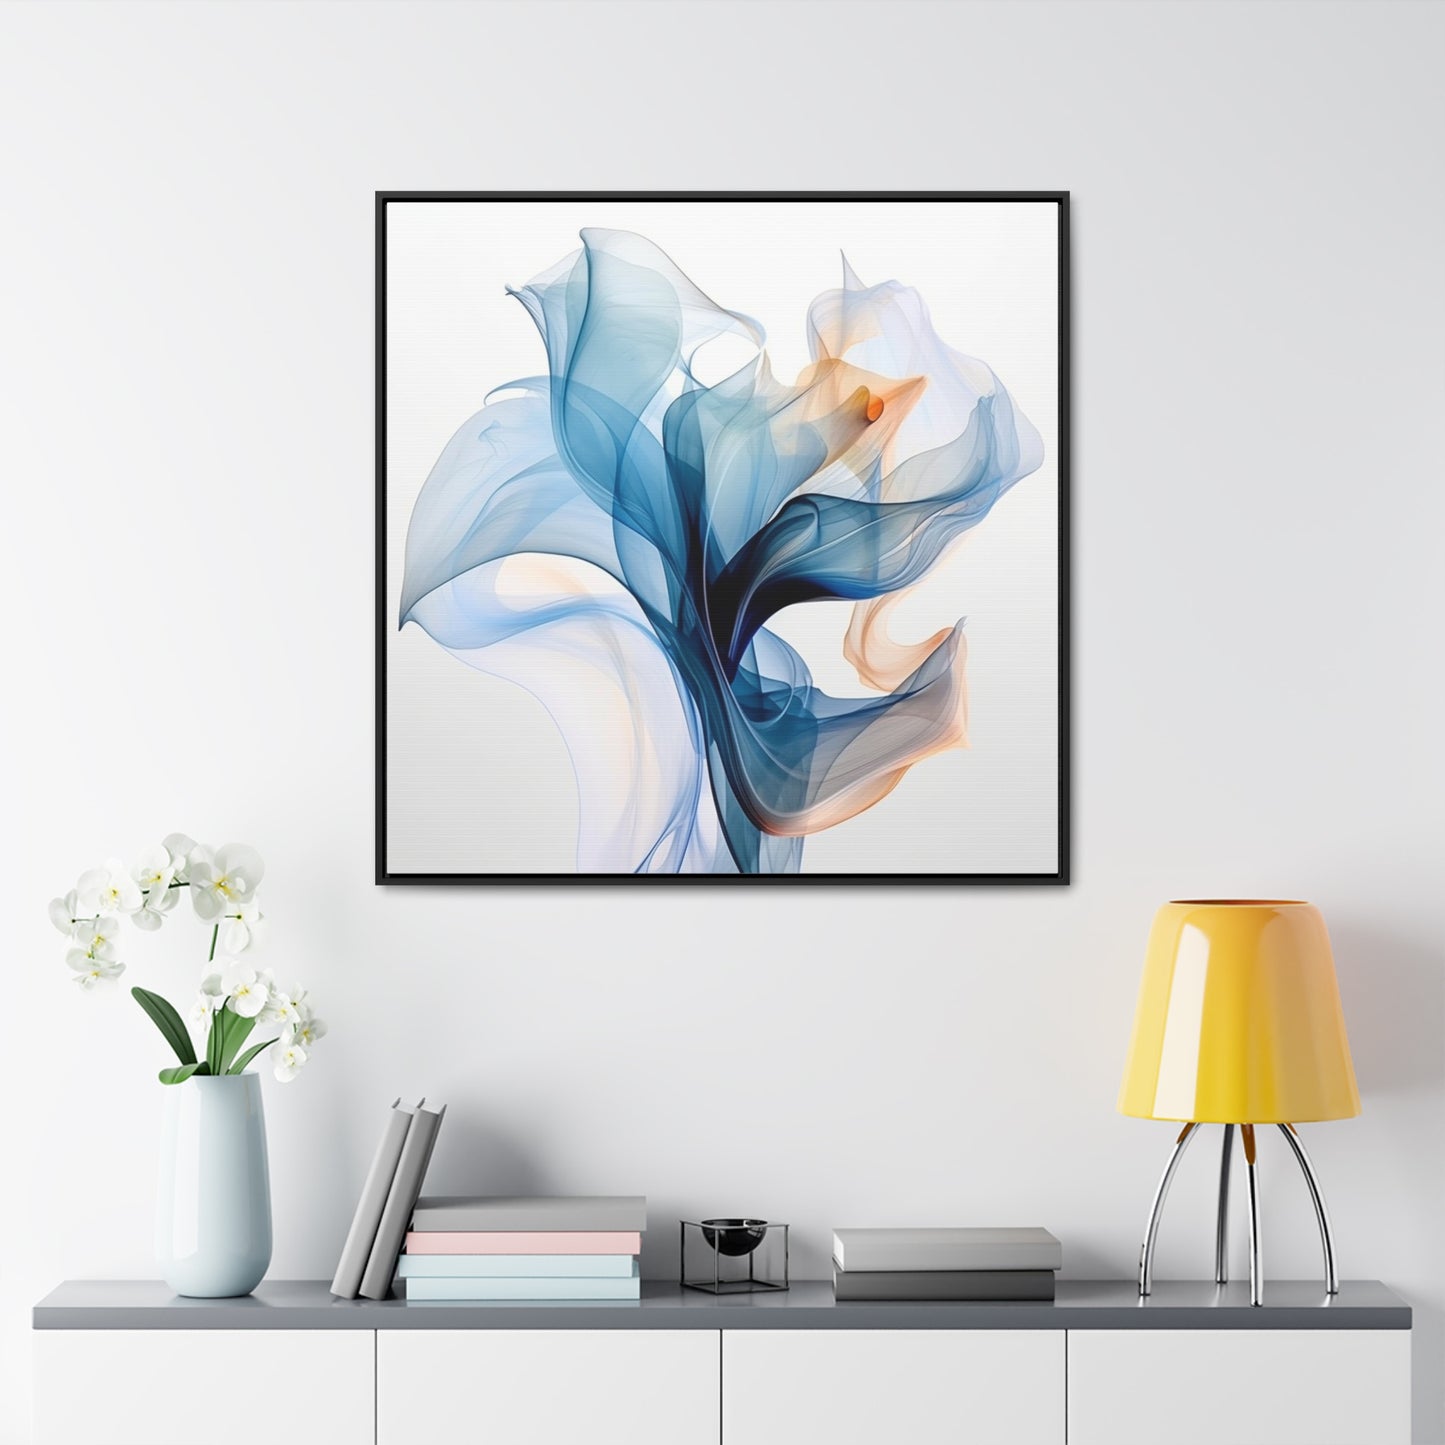 Gallery Canvas Wraps, Square Frame Blue Tluip Abstract 3